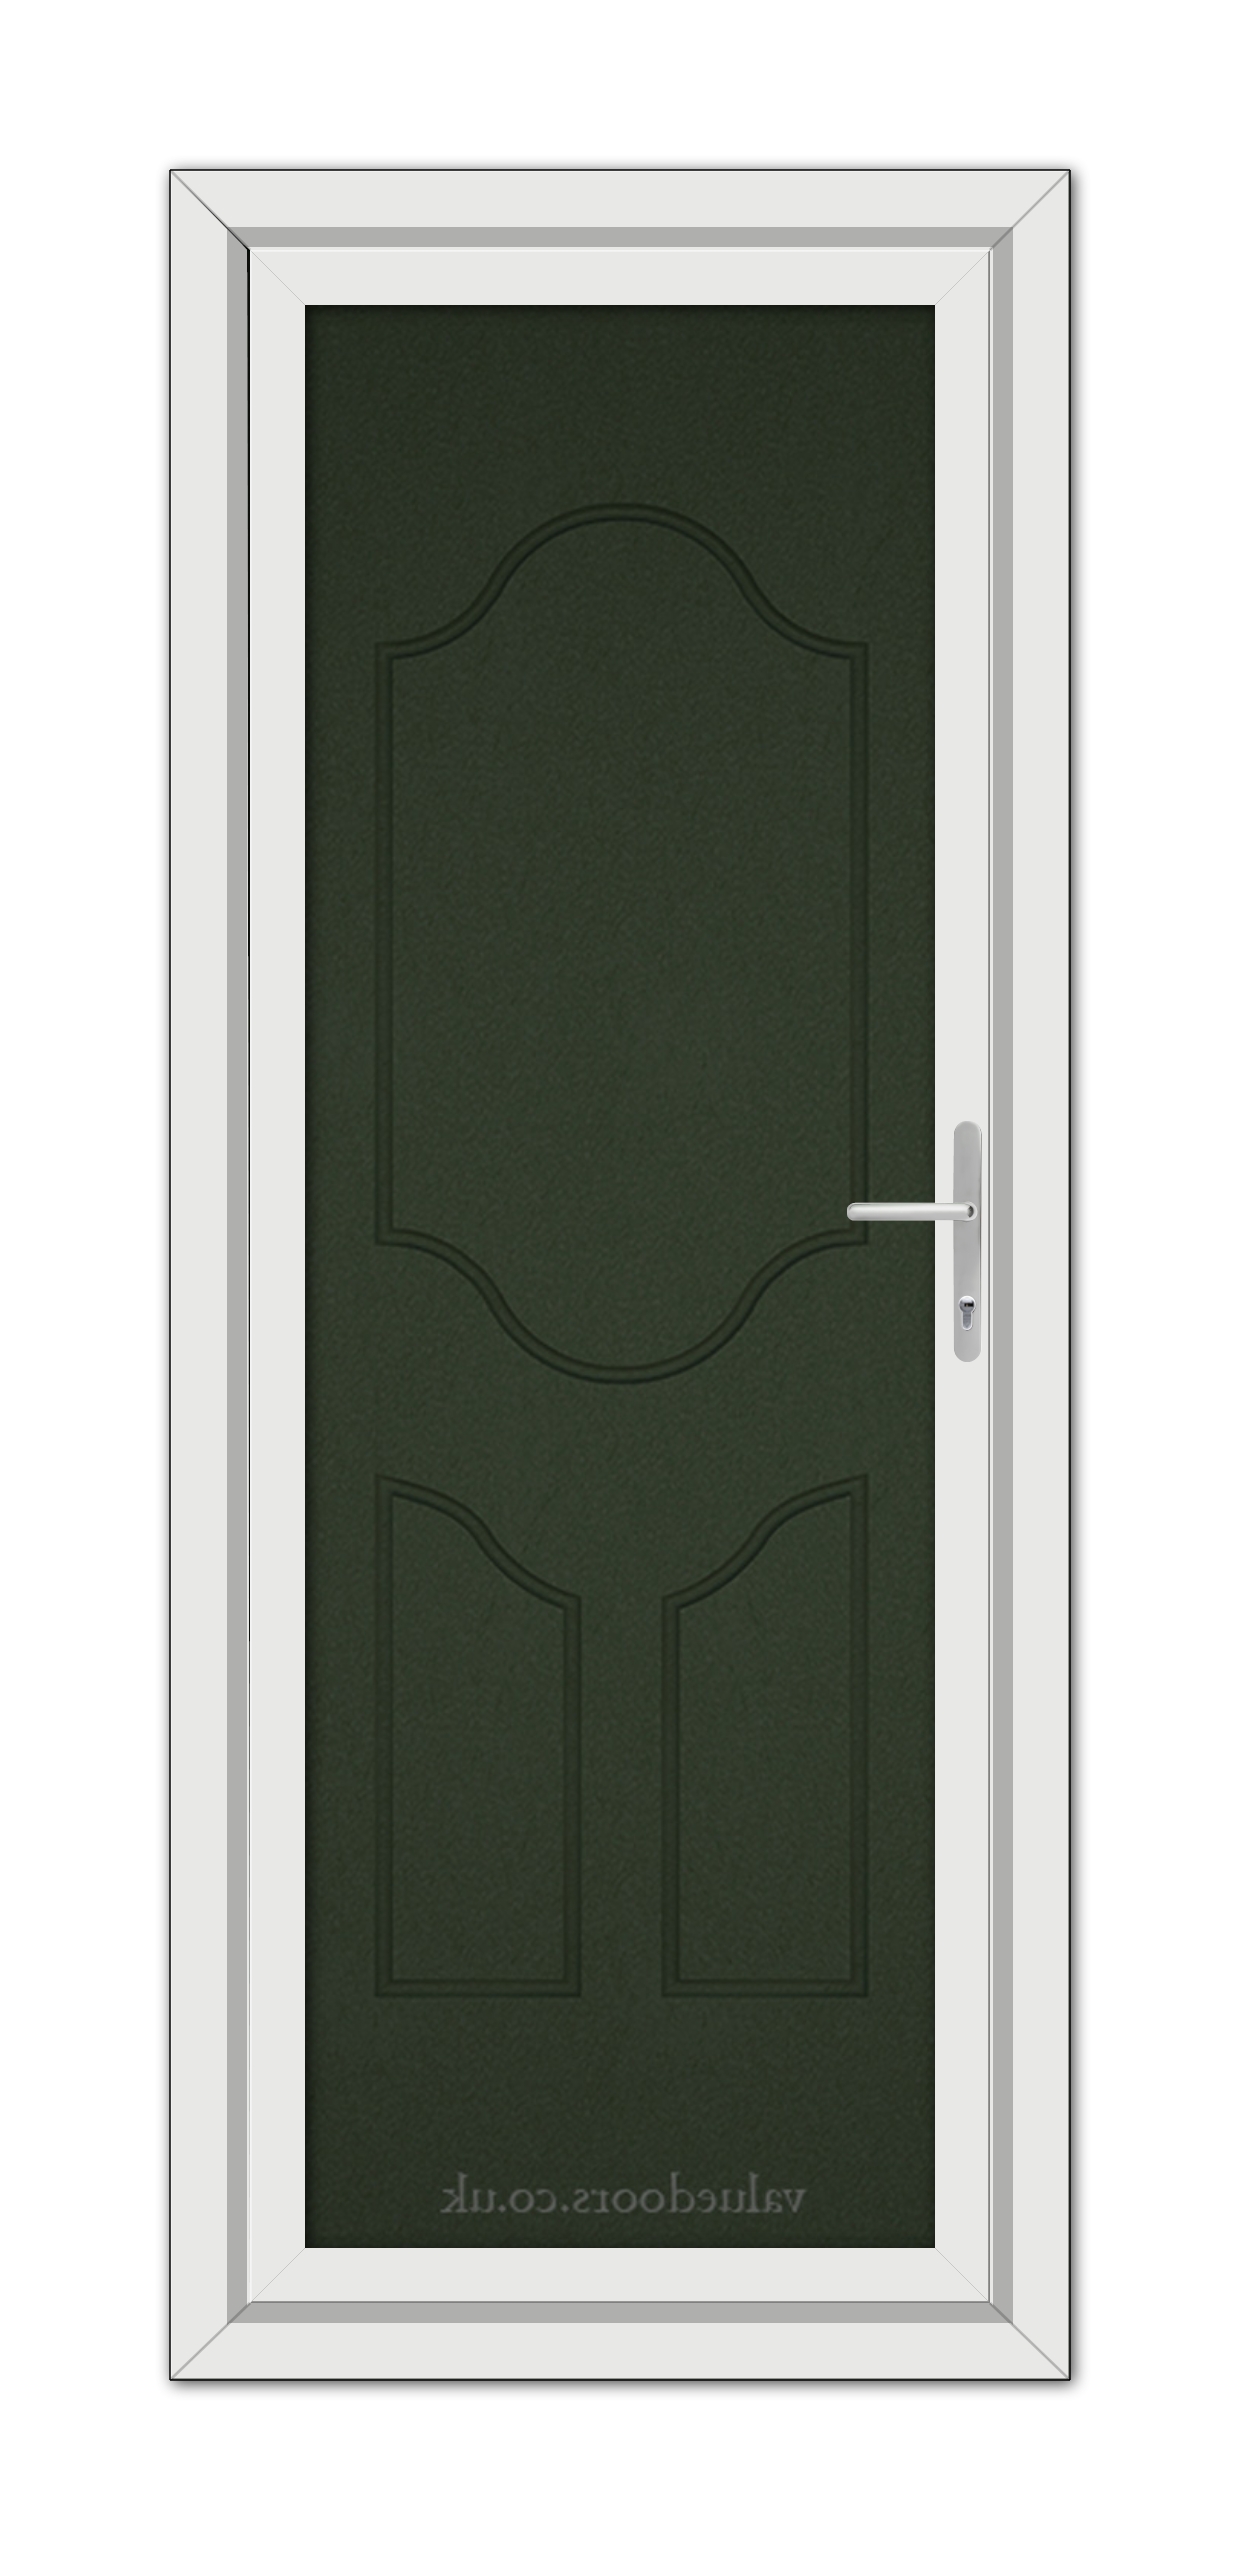 A close-up of a Green Althorpe Solid uPVC Door.